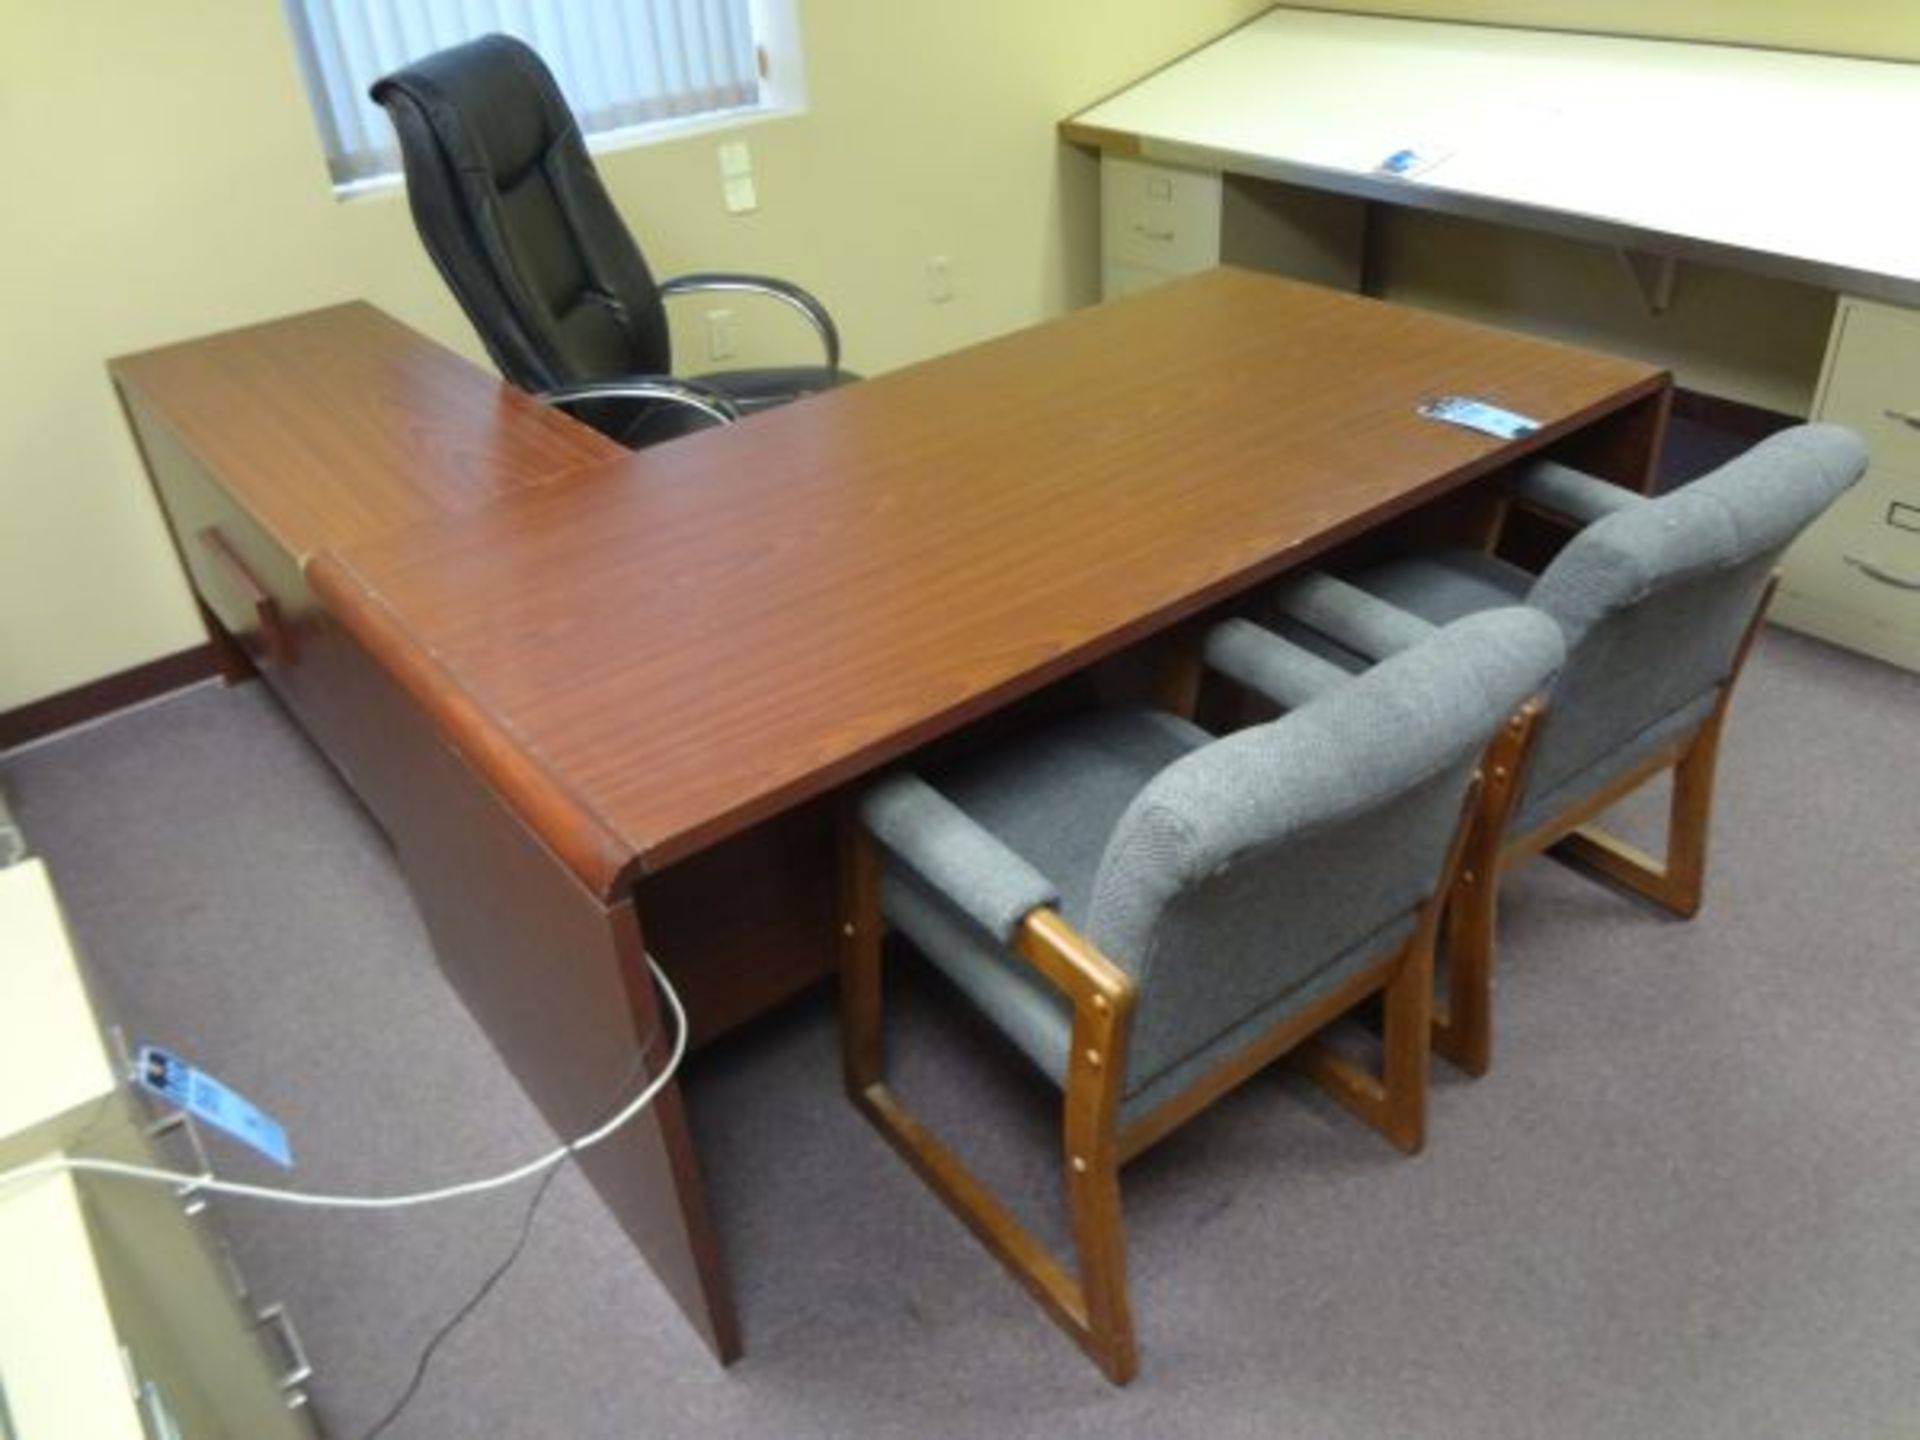 (LOT) DESK, BOOKSHELF, WOOD FILE CABINET & (5) CHAIRS (NO FURNITURE ATTACHED TO BUILDING)